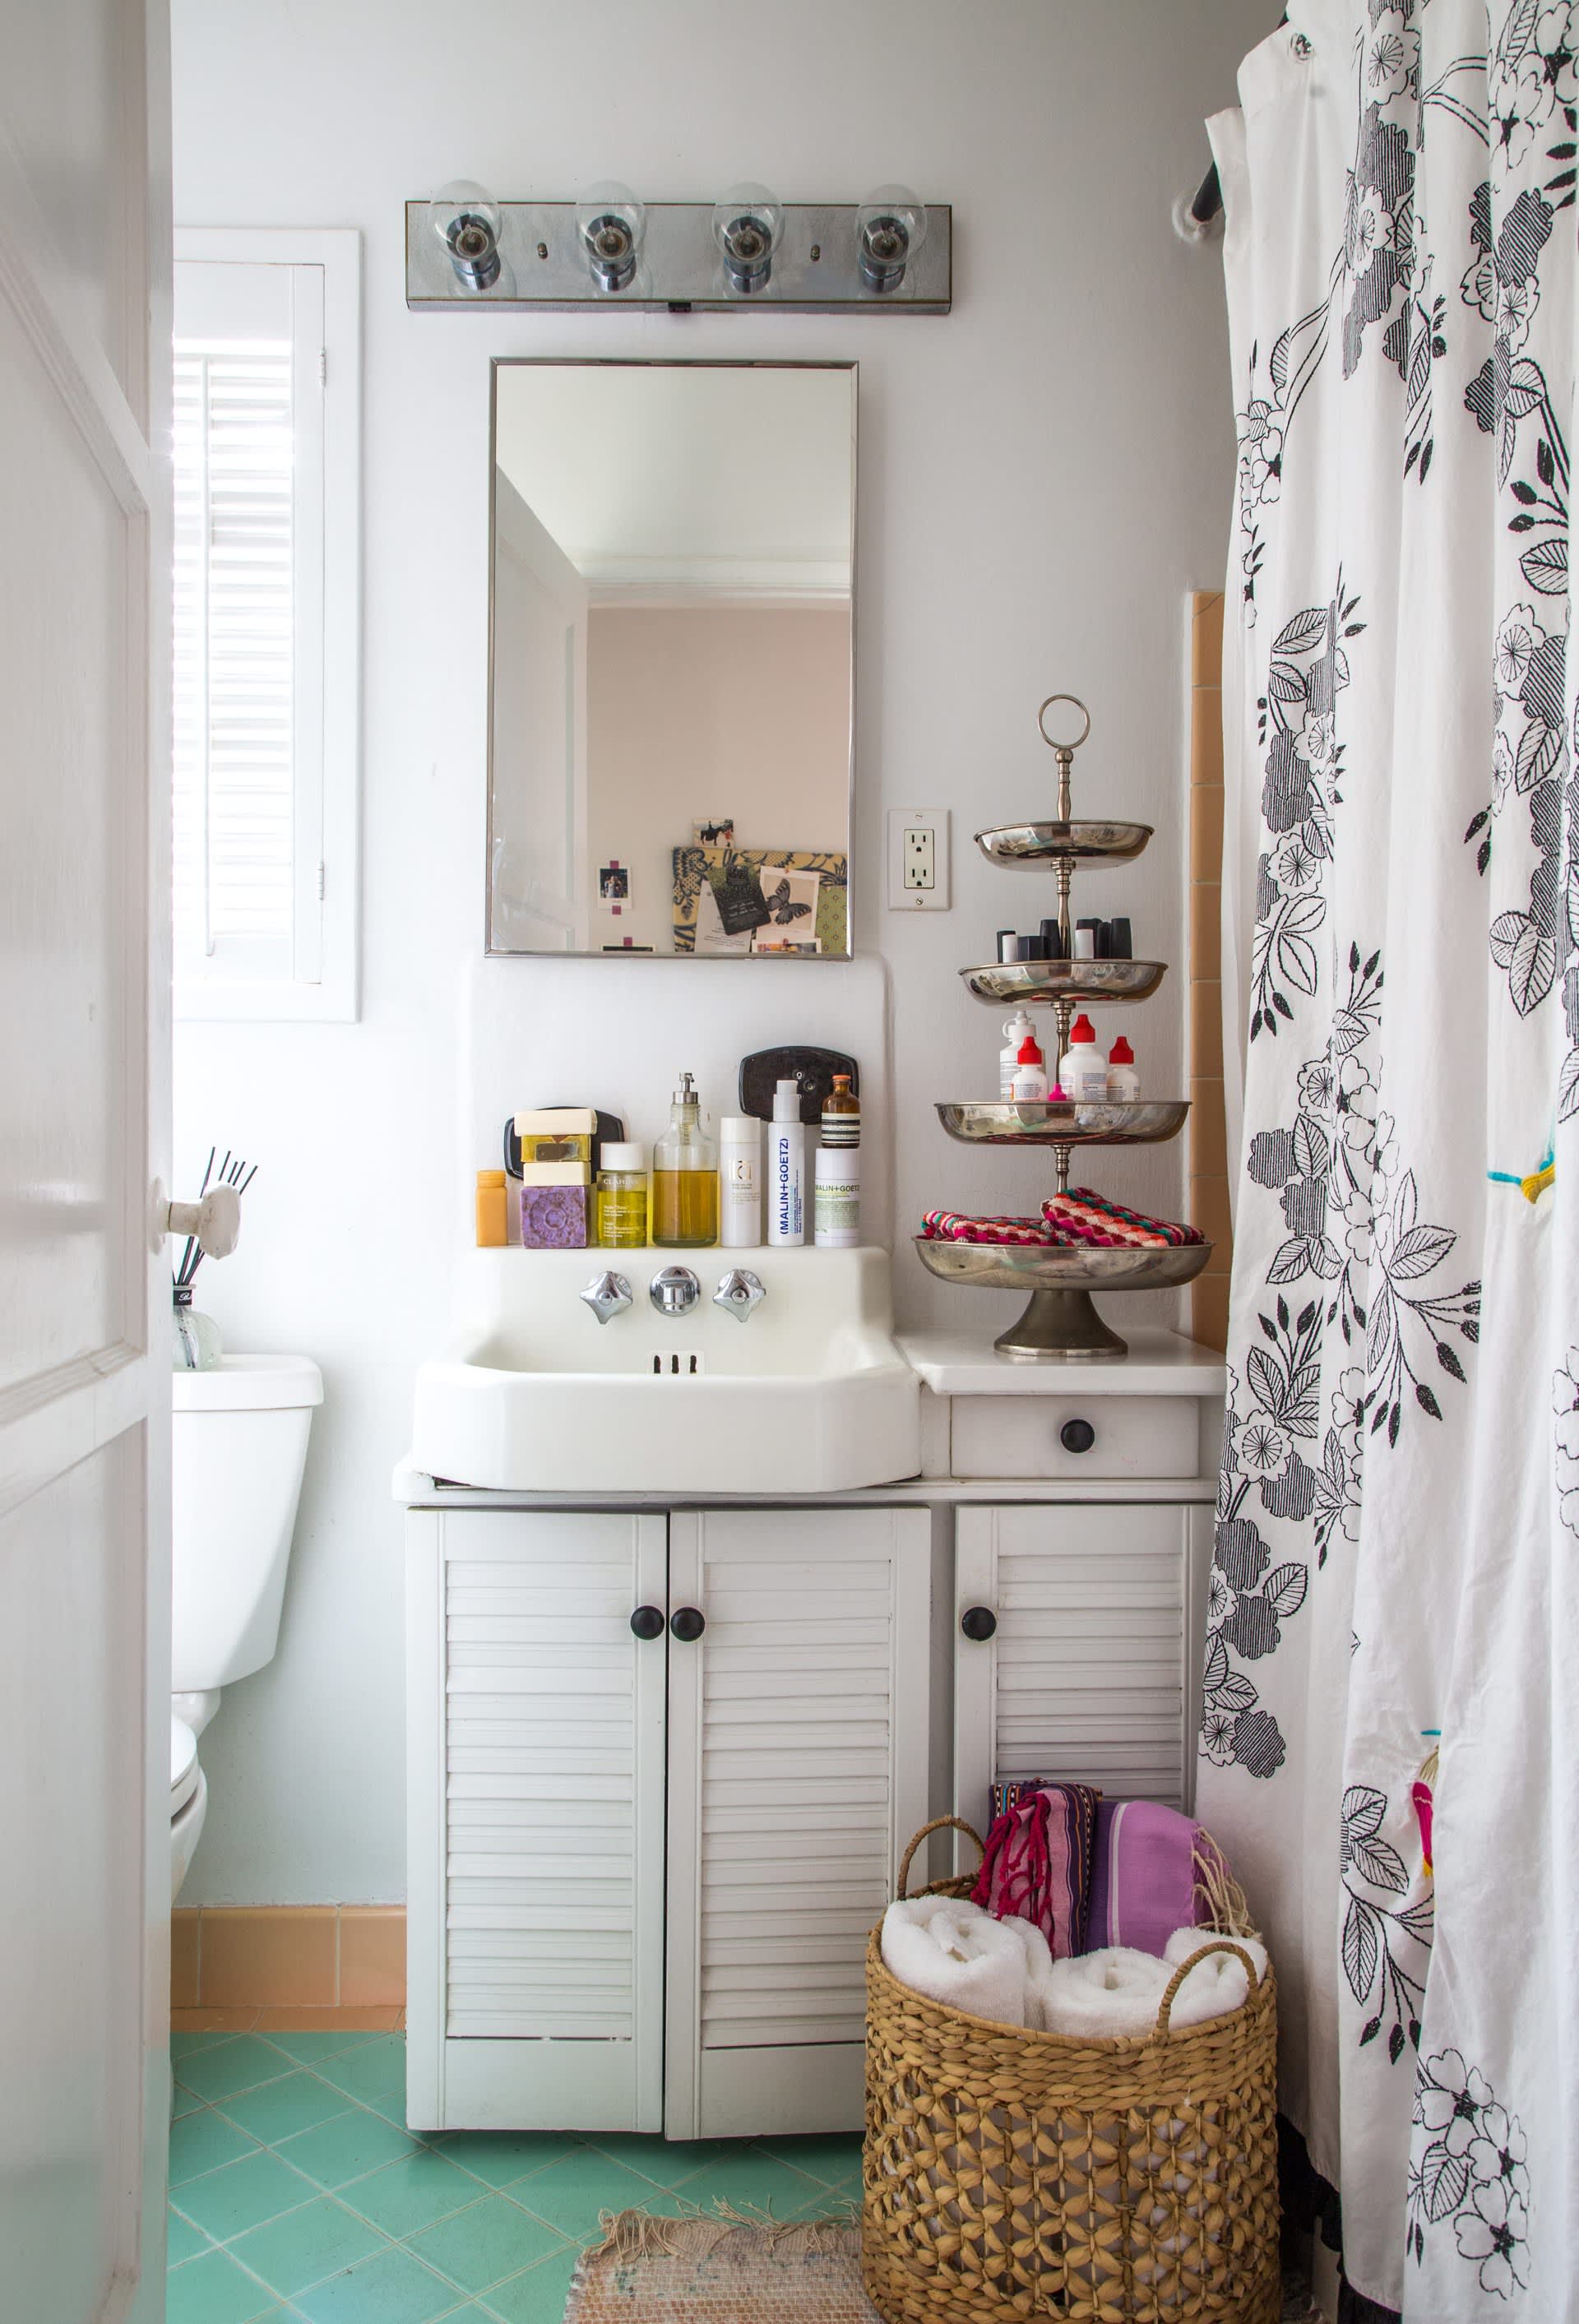 10 Styling Ideas for Small Rental Bathrooms | Apartment Therapy